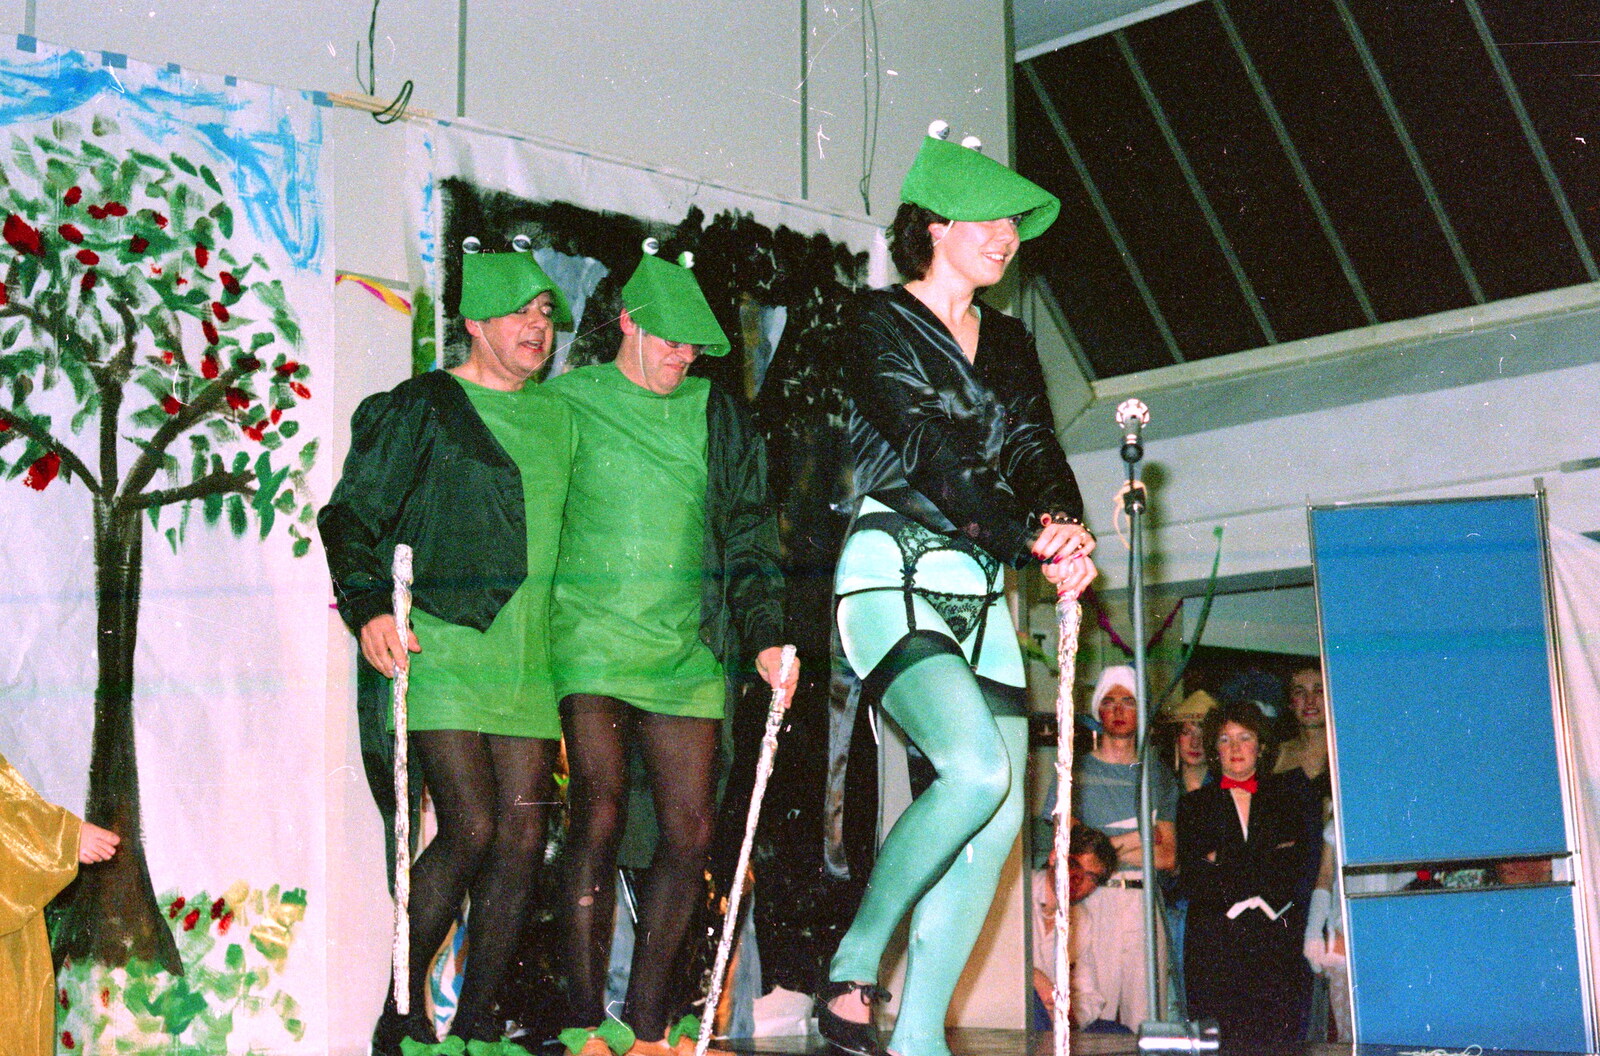 Some green panto frog action from Uni: The Fly Christmas Party and BABS Panto, Plymouth Polytechnic, Devon - December 11th 1985